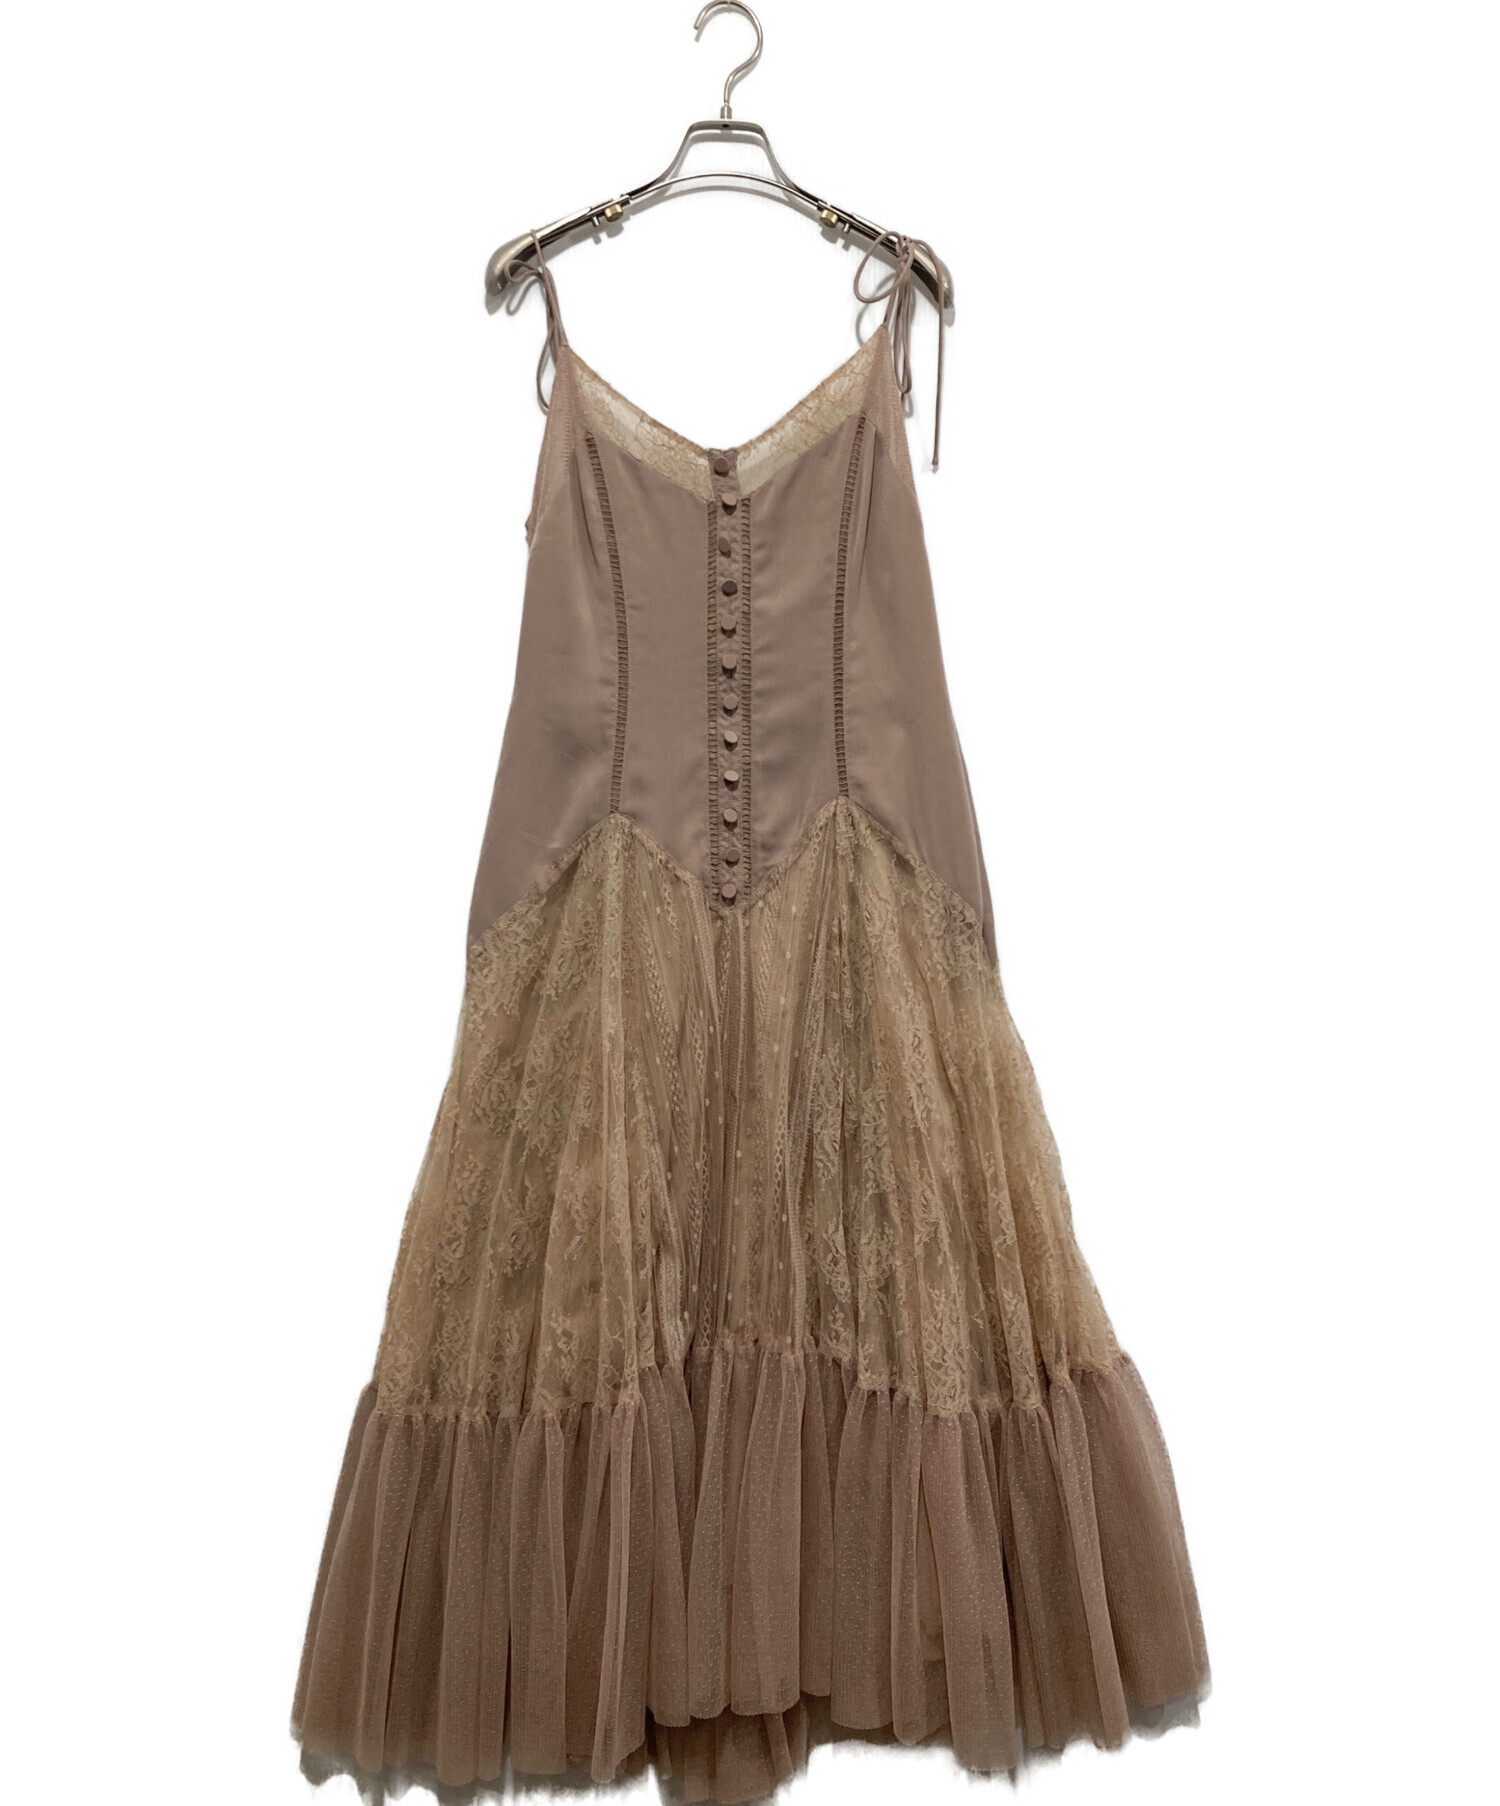 HER LIP TO (ハーリップトゥ) Lace-Trimmed Satin Cami Dress ピンク サイズ:M